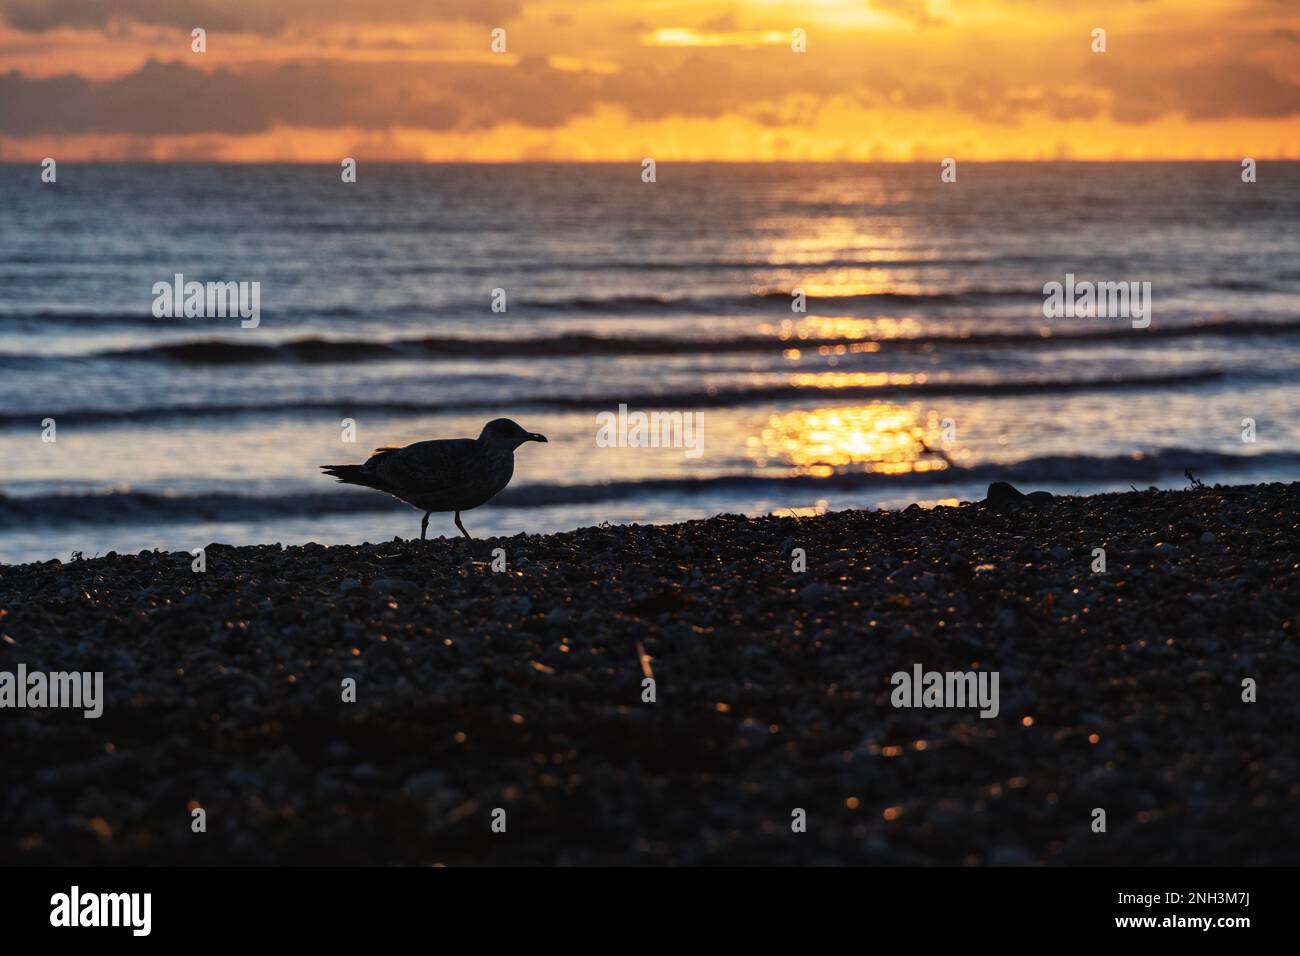 silhouette of a gull walking along the beach at sunset, Worthing, West Sussex, UK Stock Photo